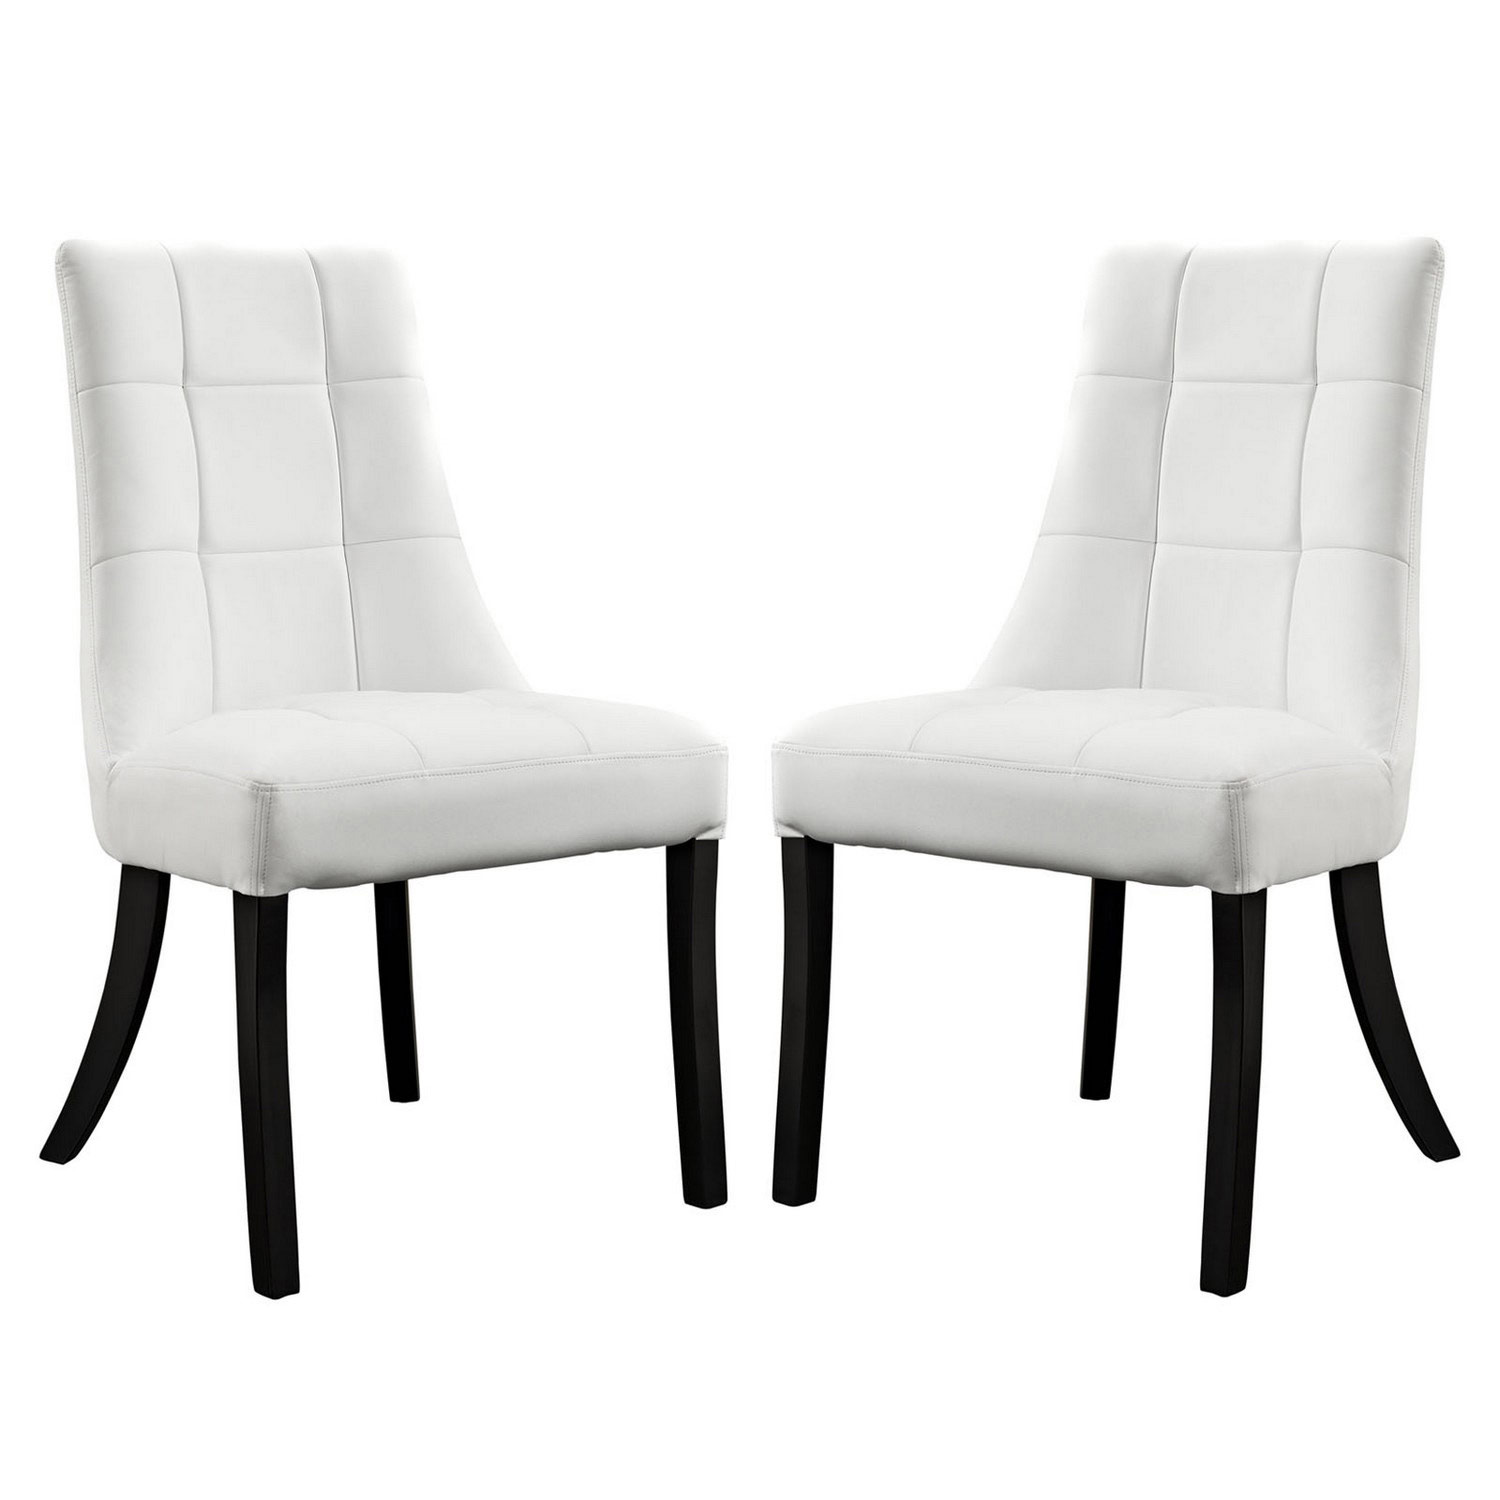 Modway Noblesse Vinyl Dining Chair Set of 2 - White